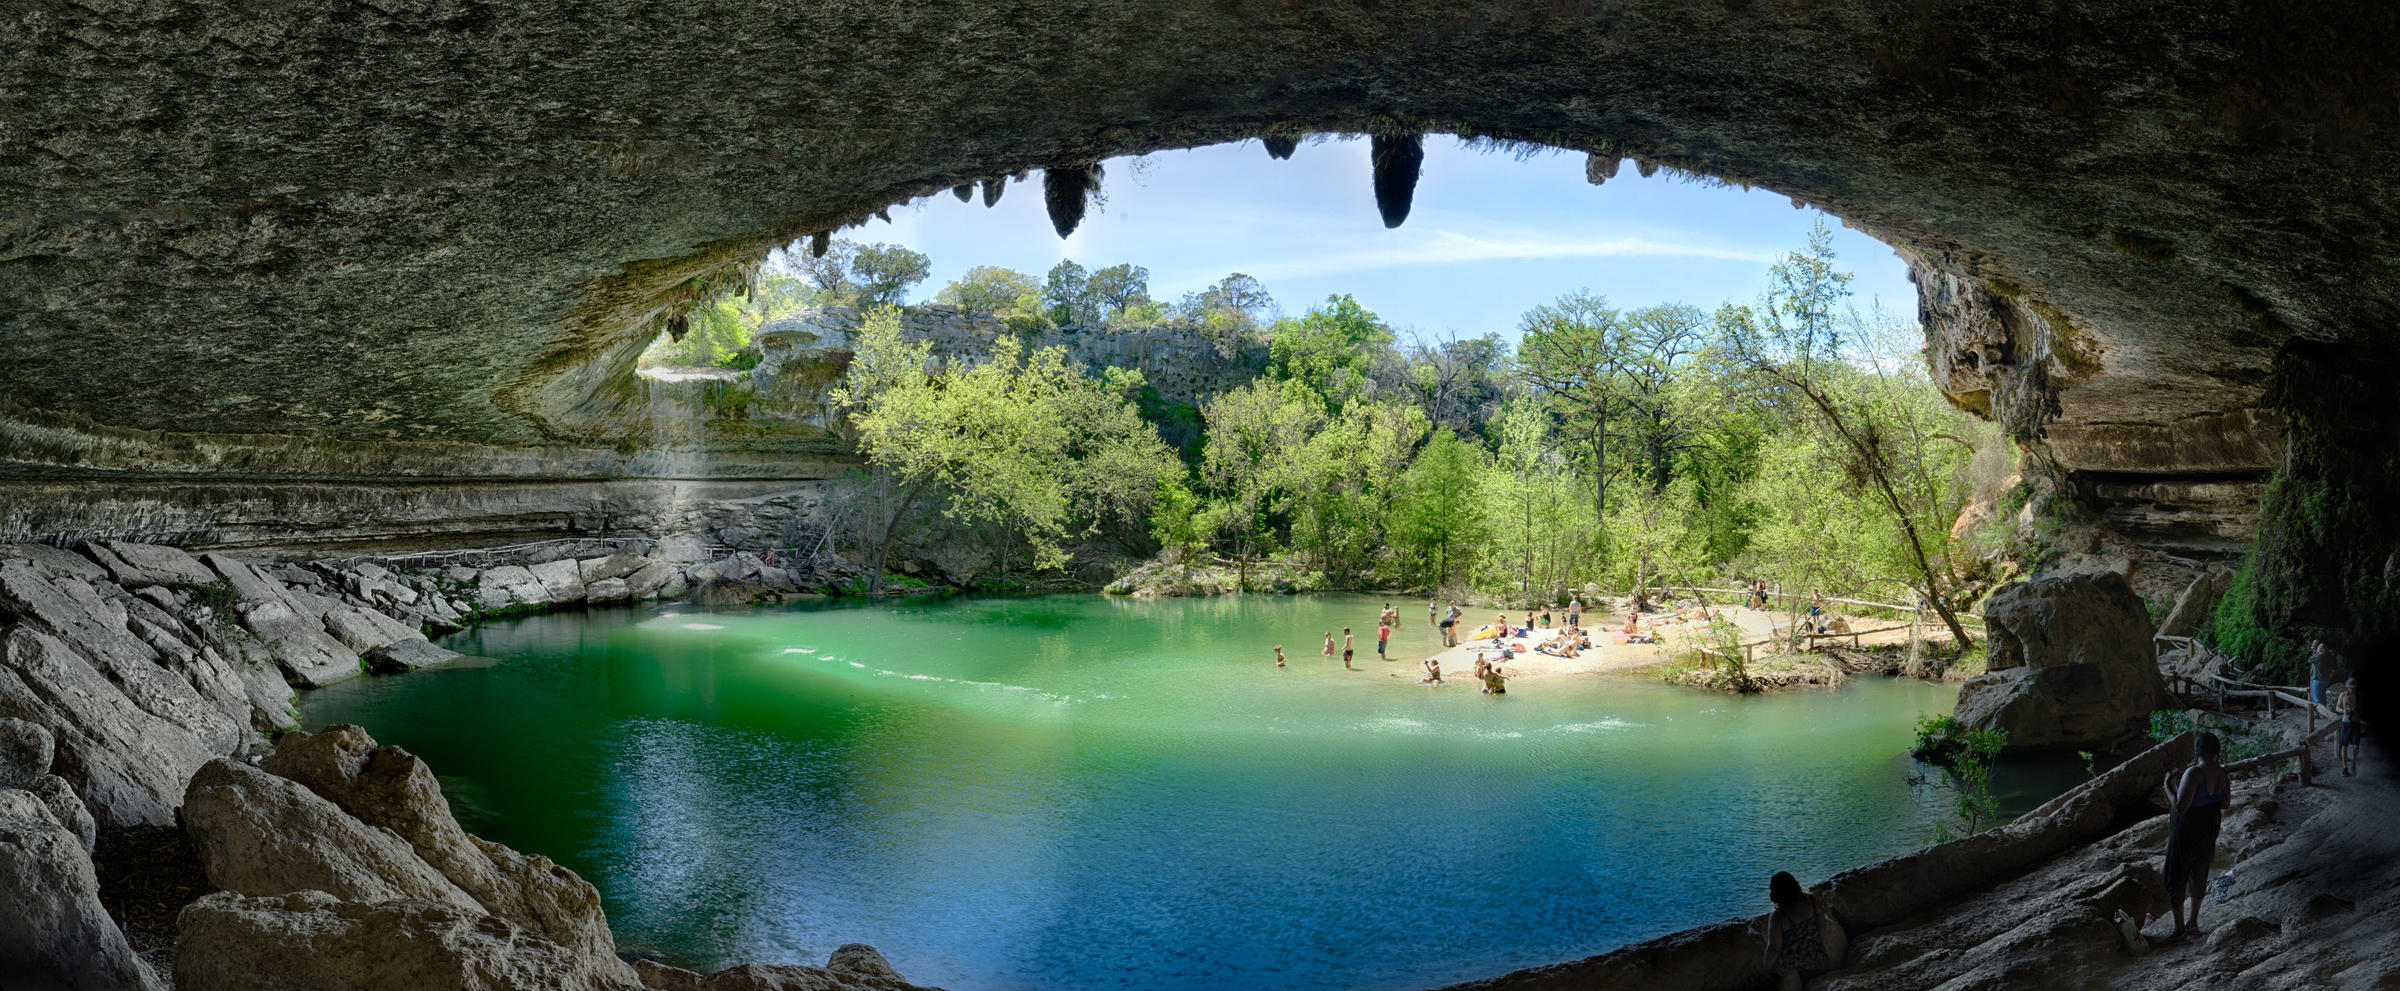 Want to Swim at Hamilton Pool This Summer? You'll Need a ...
